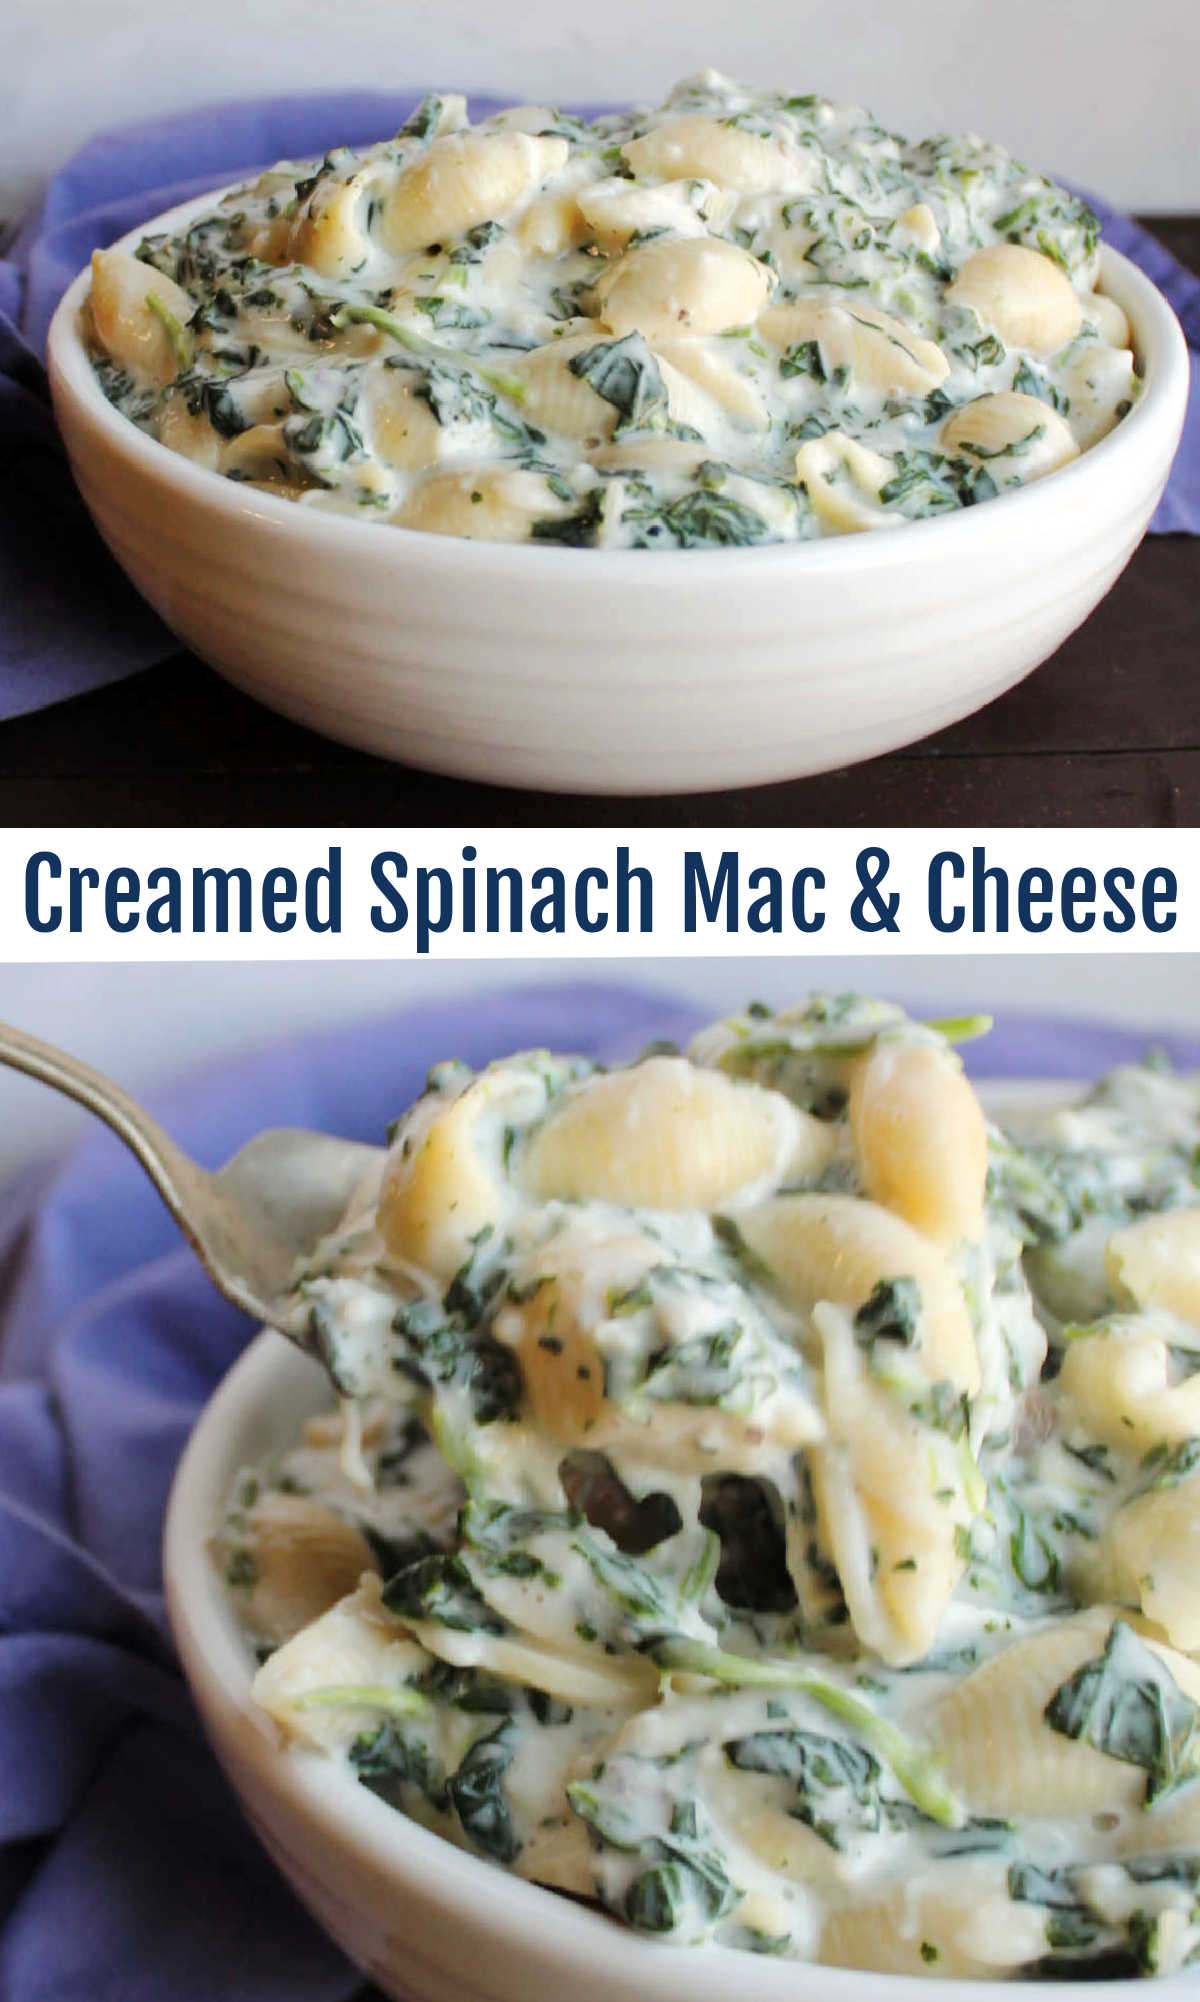 This yummy mac and cheese recipe is super creamy and cheesy. Plus it has spinach mixed in to balance it all out. It is a perfect accompaniment to almost any entrée. Just imagine how good it will look on your dinner plate.